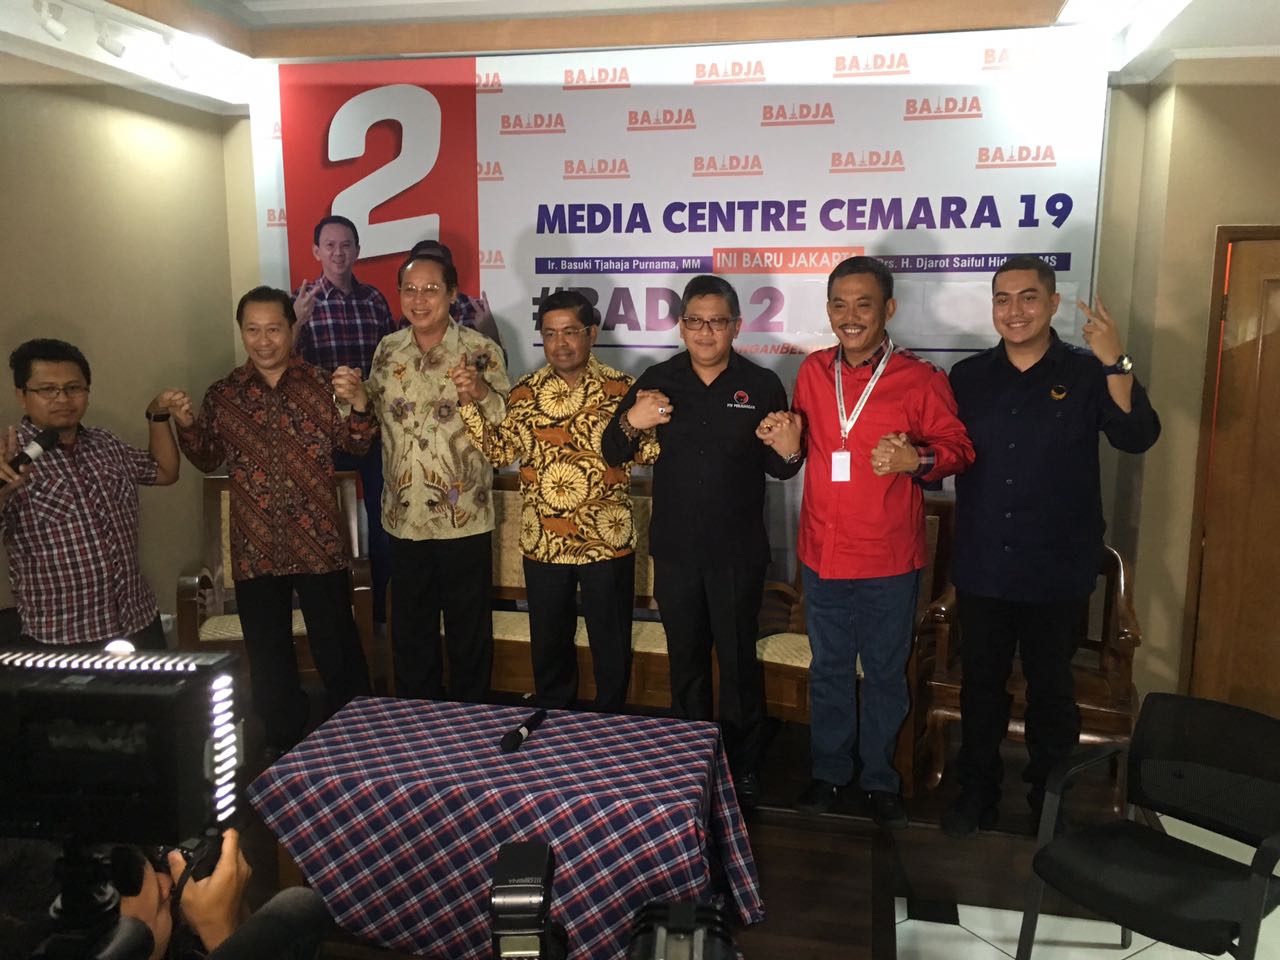 Ahok abandoned his volunteers to align with party leaders such as these.